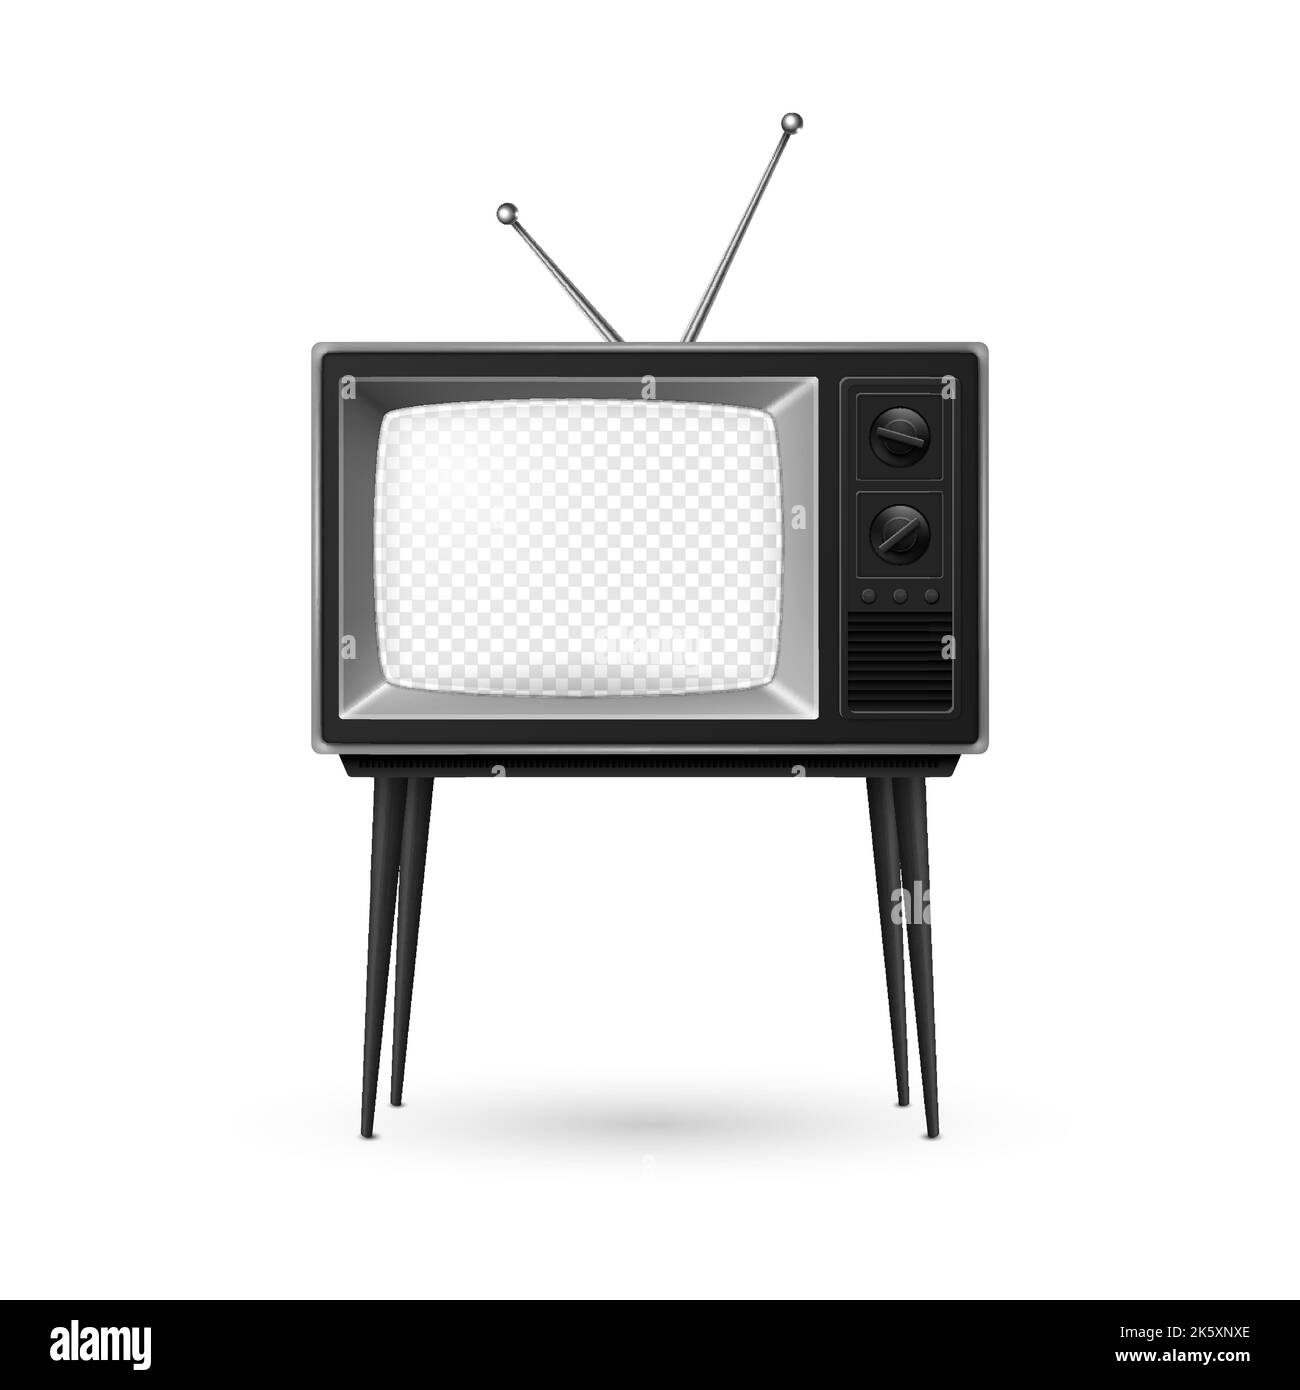 Vector 3d Realistic Retro TV Receiver with Transparent Screen and Antenna Isolated on White Background. Home Interior Design Concept. Vintage TV Set Stock Vector